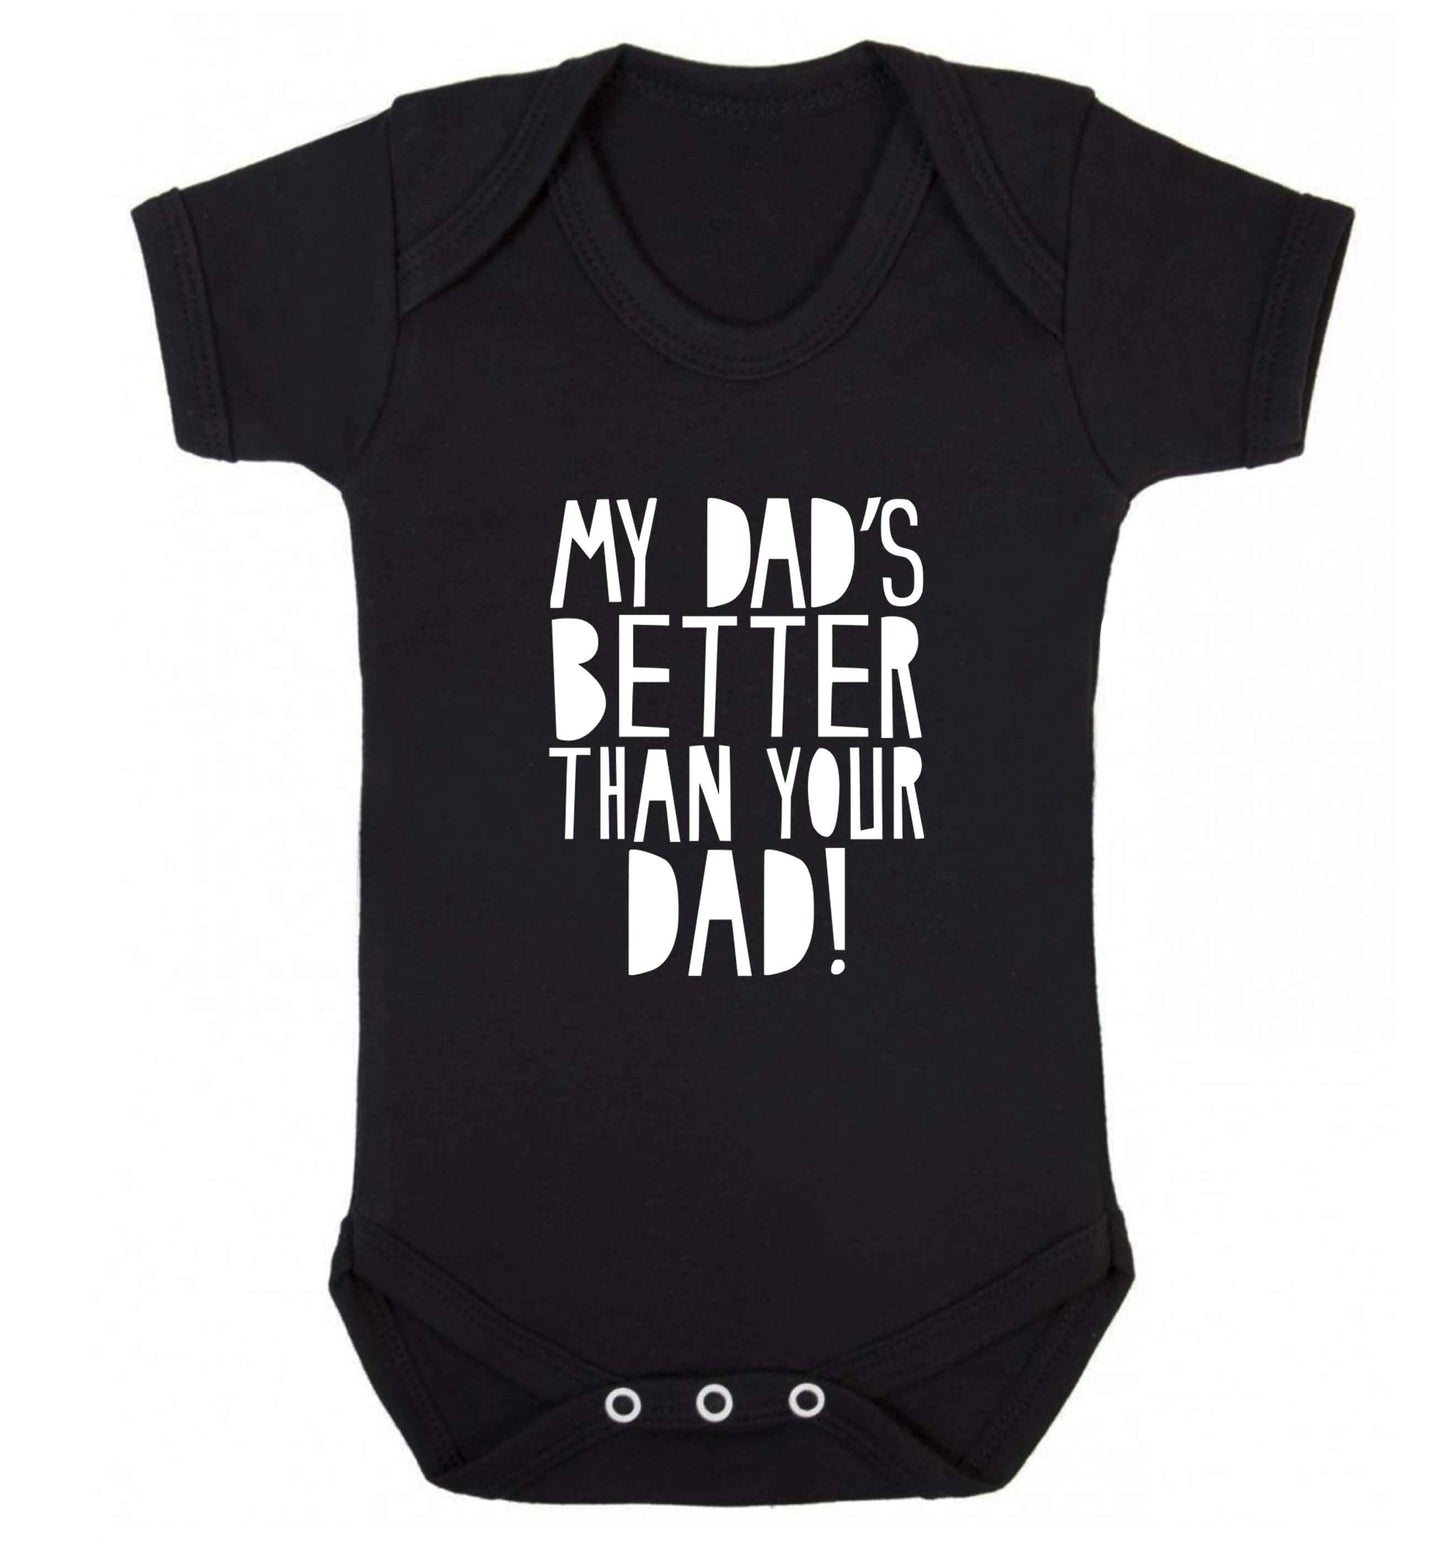 My dad's better than your dad! baby vest black 18-24 months